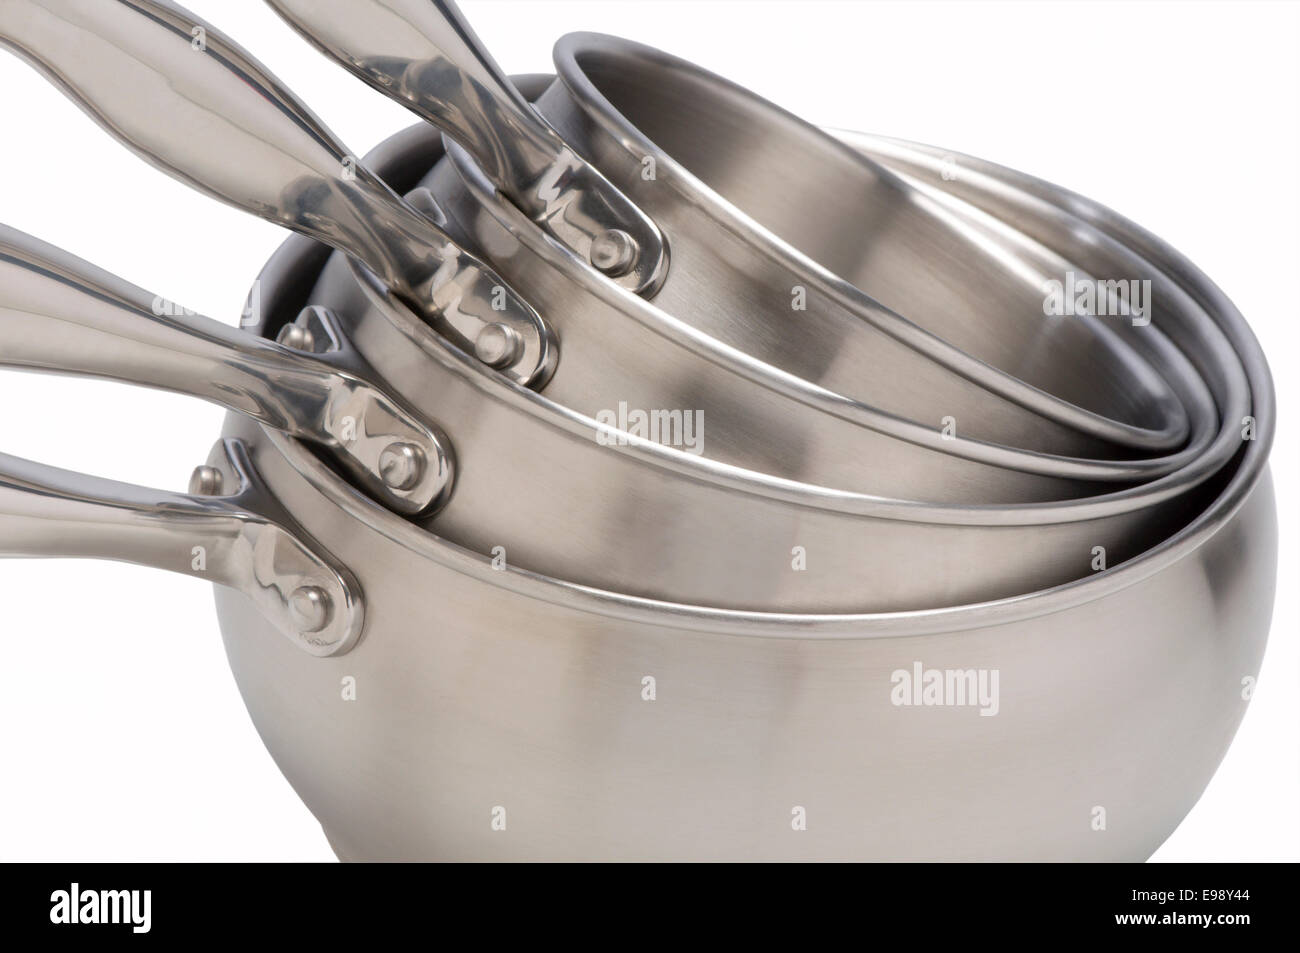 https://c8.alamy.com/comp/E98Y44/stainless-steel-cooking-pots-E98Y44.jpg